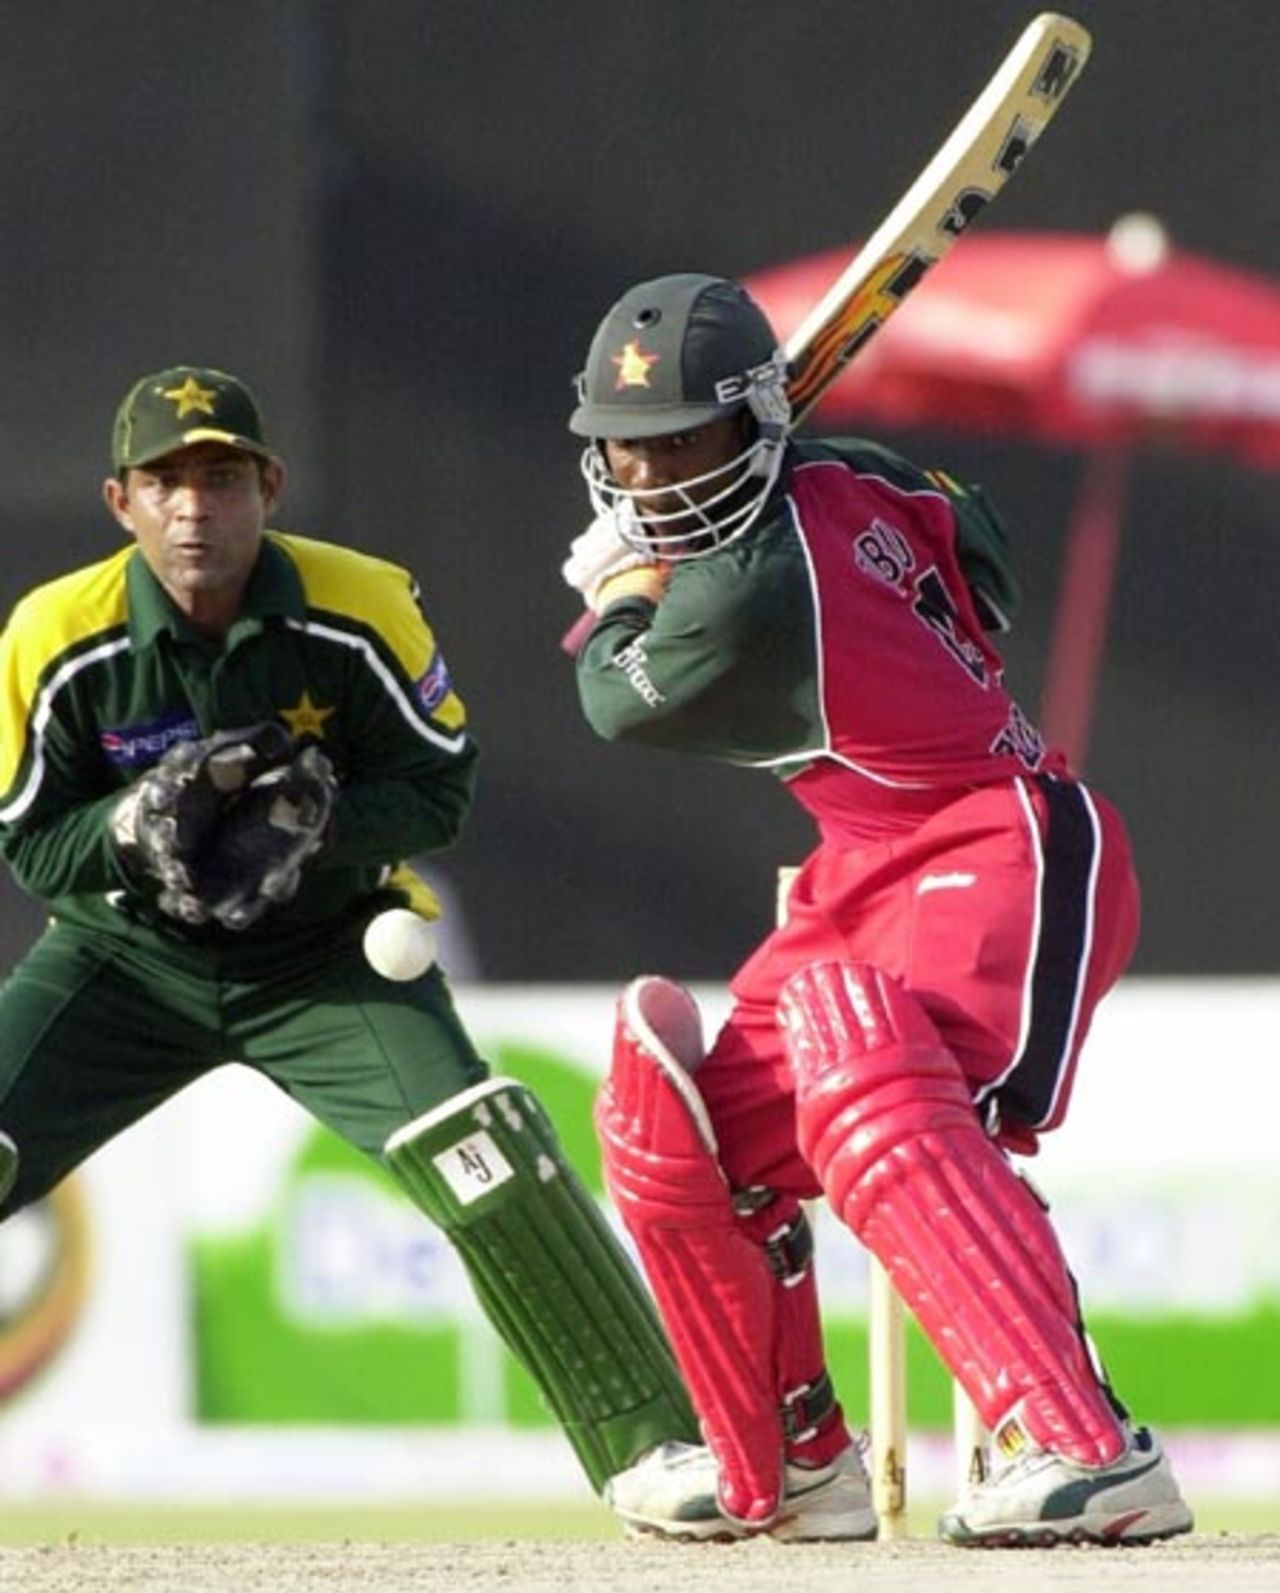 Zimbabwe top scorer Tatenda Taibu (R) drives for a boundary during his brilliant unbeaten 74 runs inning as Pakistan wicketkeeper Rashid Latif looks on during the final of the Four Nation Sharjah Cricket Tournament, 10 April 2003.